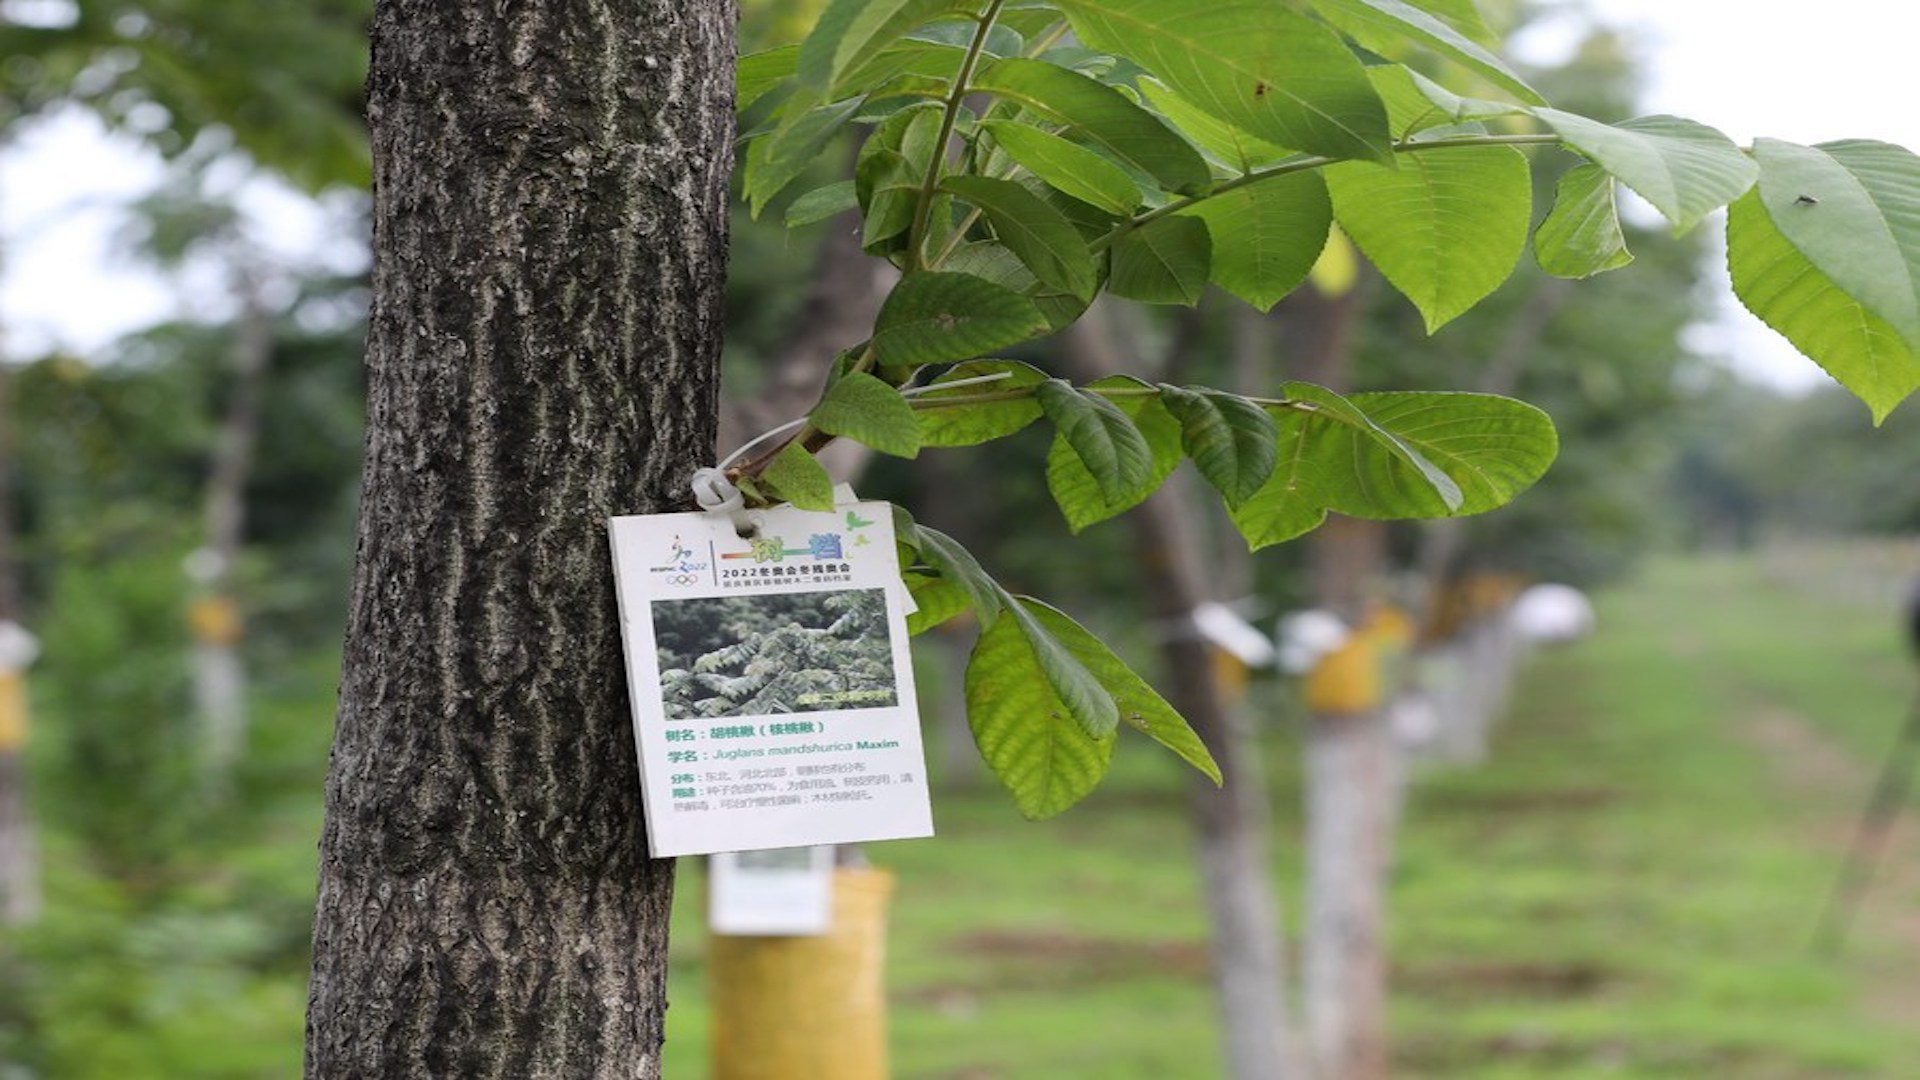 Tree in Yanqing competition zone registered and marked with QR code at Beijing 2022 Olympics sustainability